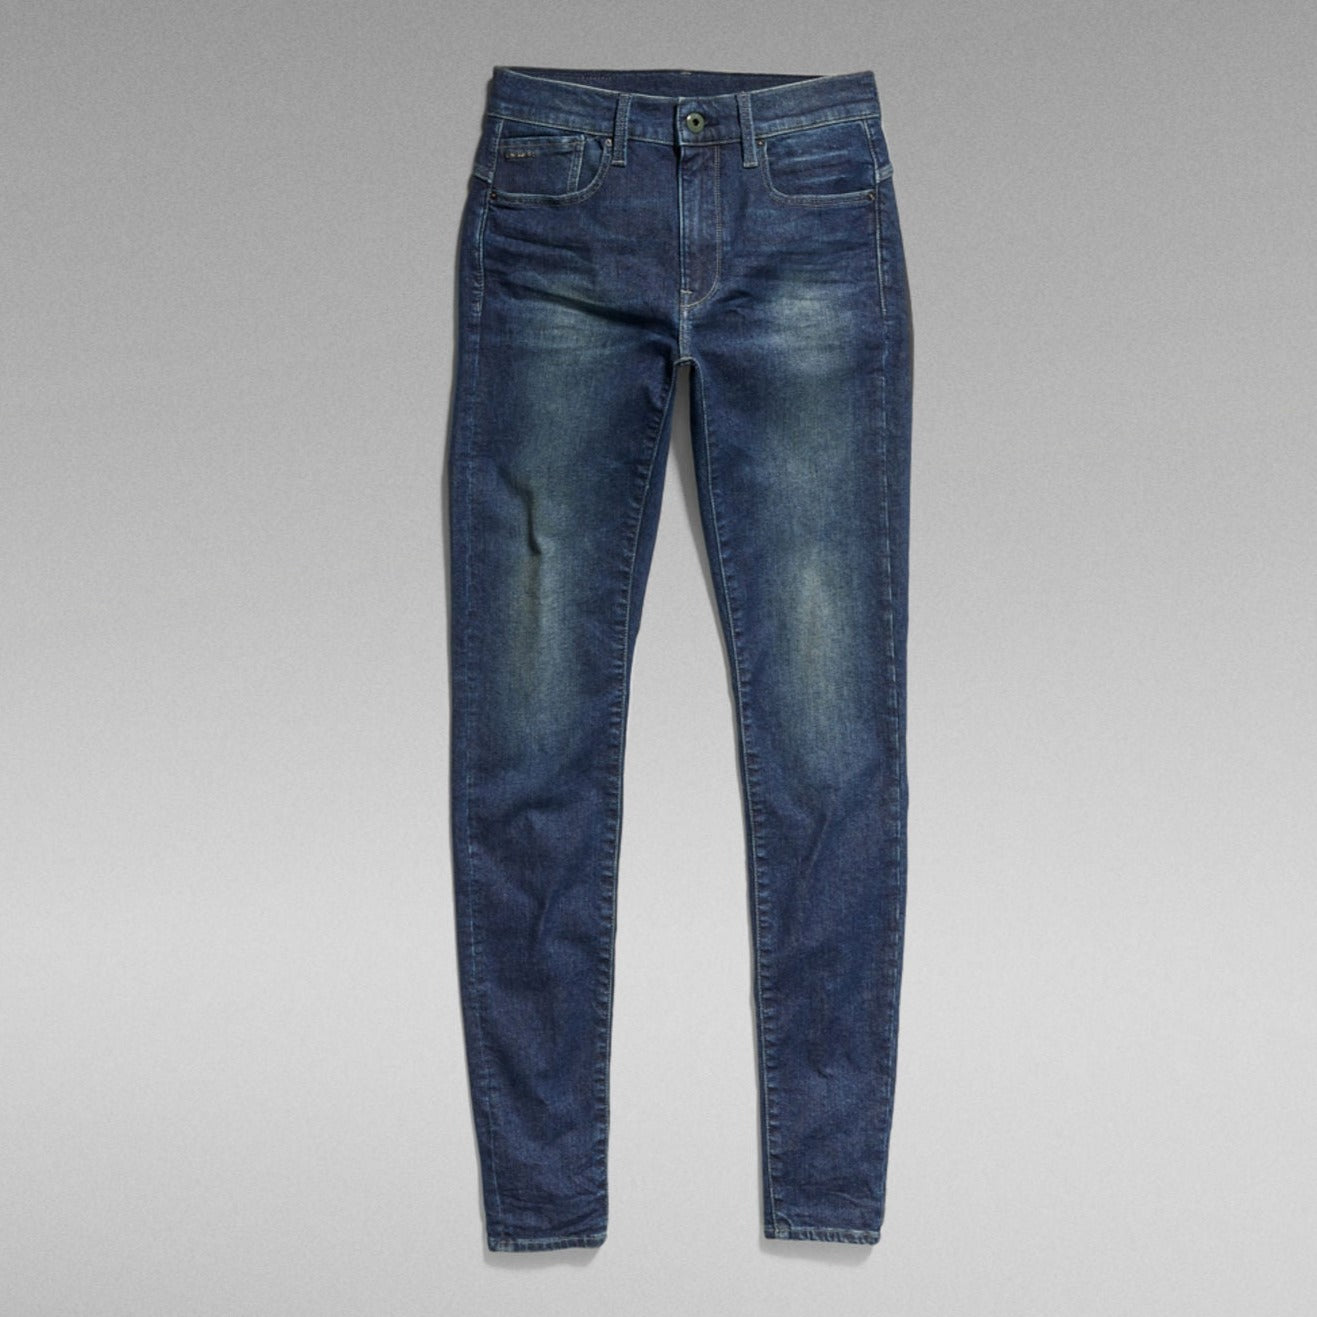 G-Star Raw - Lhana Skinny Jean - Antique Forest Blue